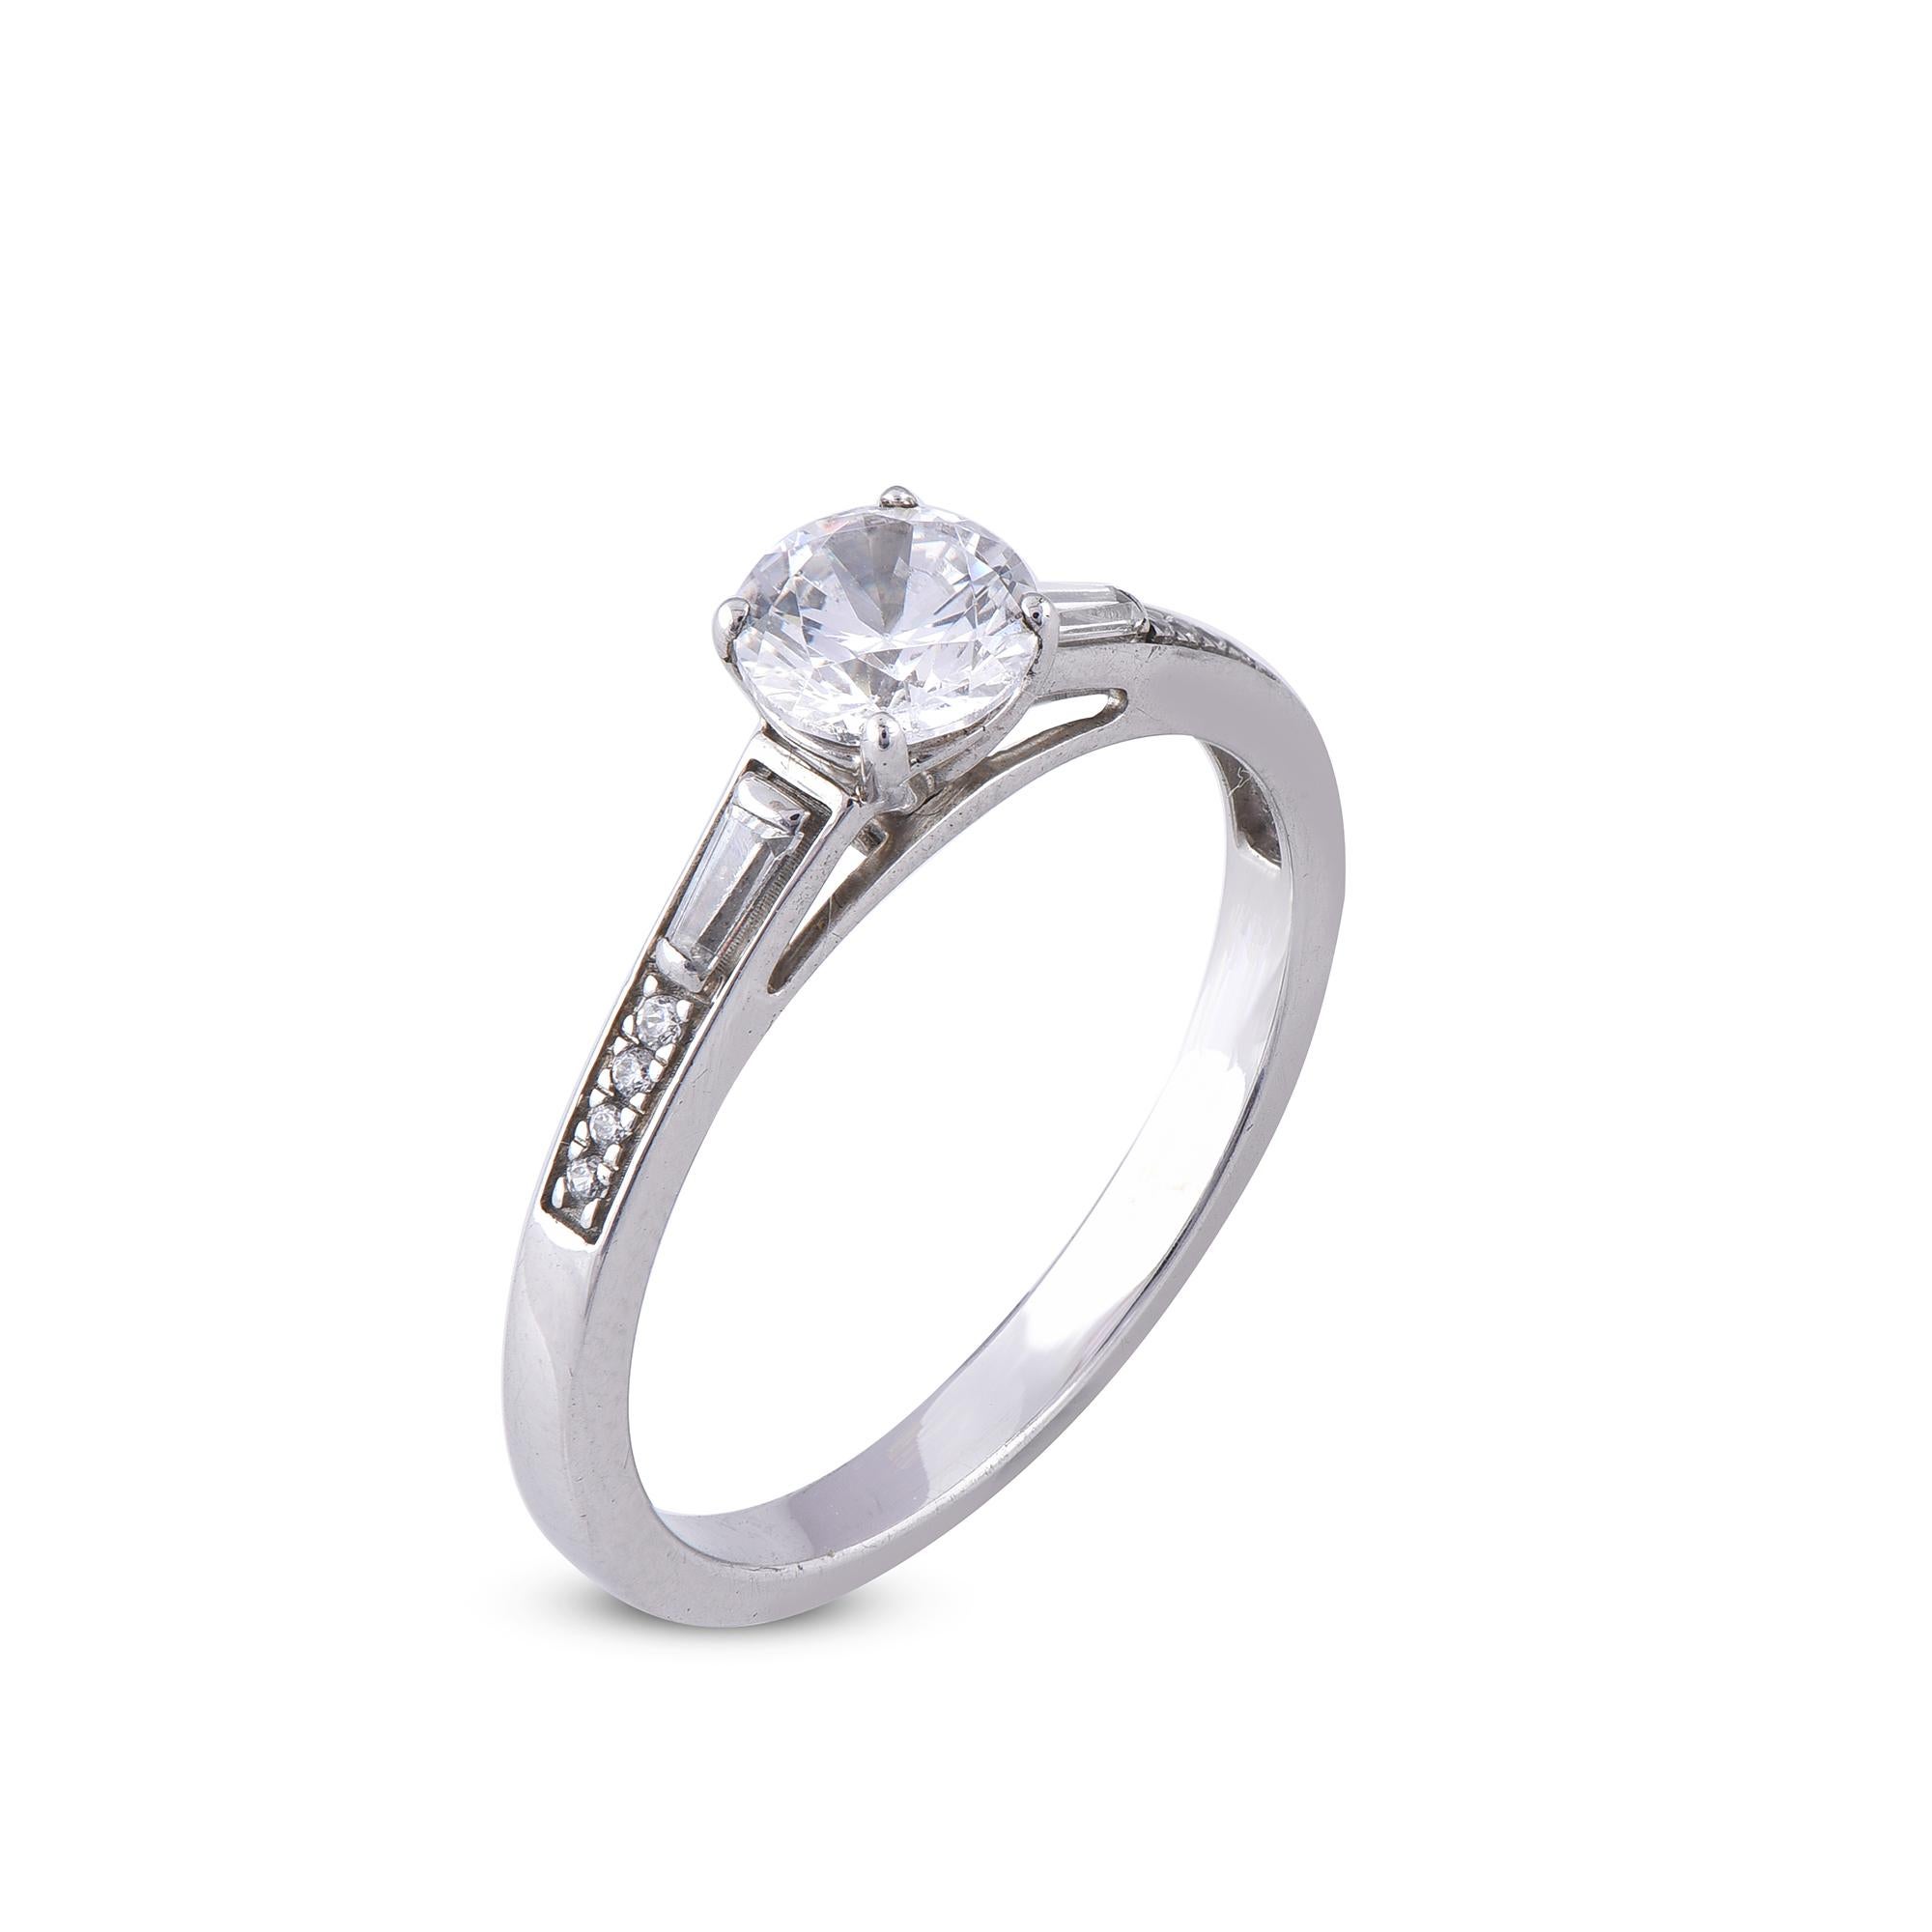 Stunning and classic, this diamond ring is beautifully crafted in 18 Karat White gold. It features 0.75 ct of 9 round and 2 Baguettes diamonds in secured Pave, prong and channel settings. The diamonds are natural, not-treated and conflict-free with